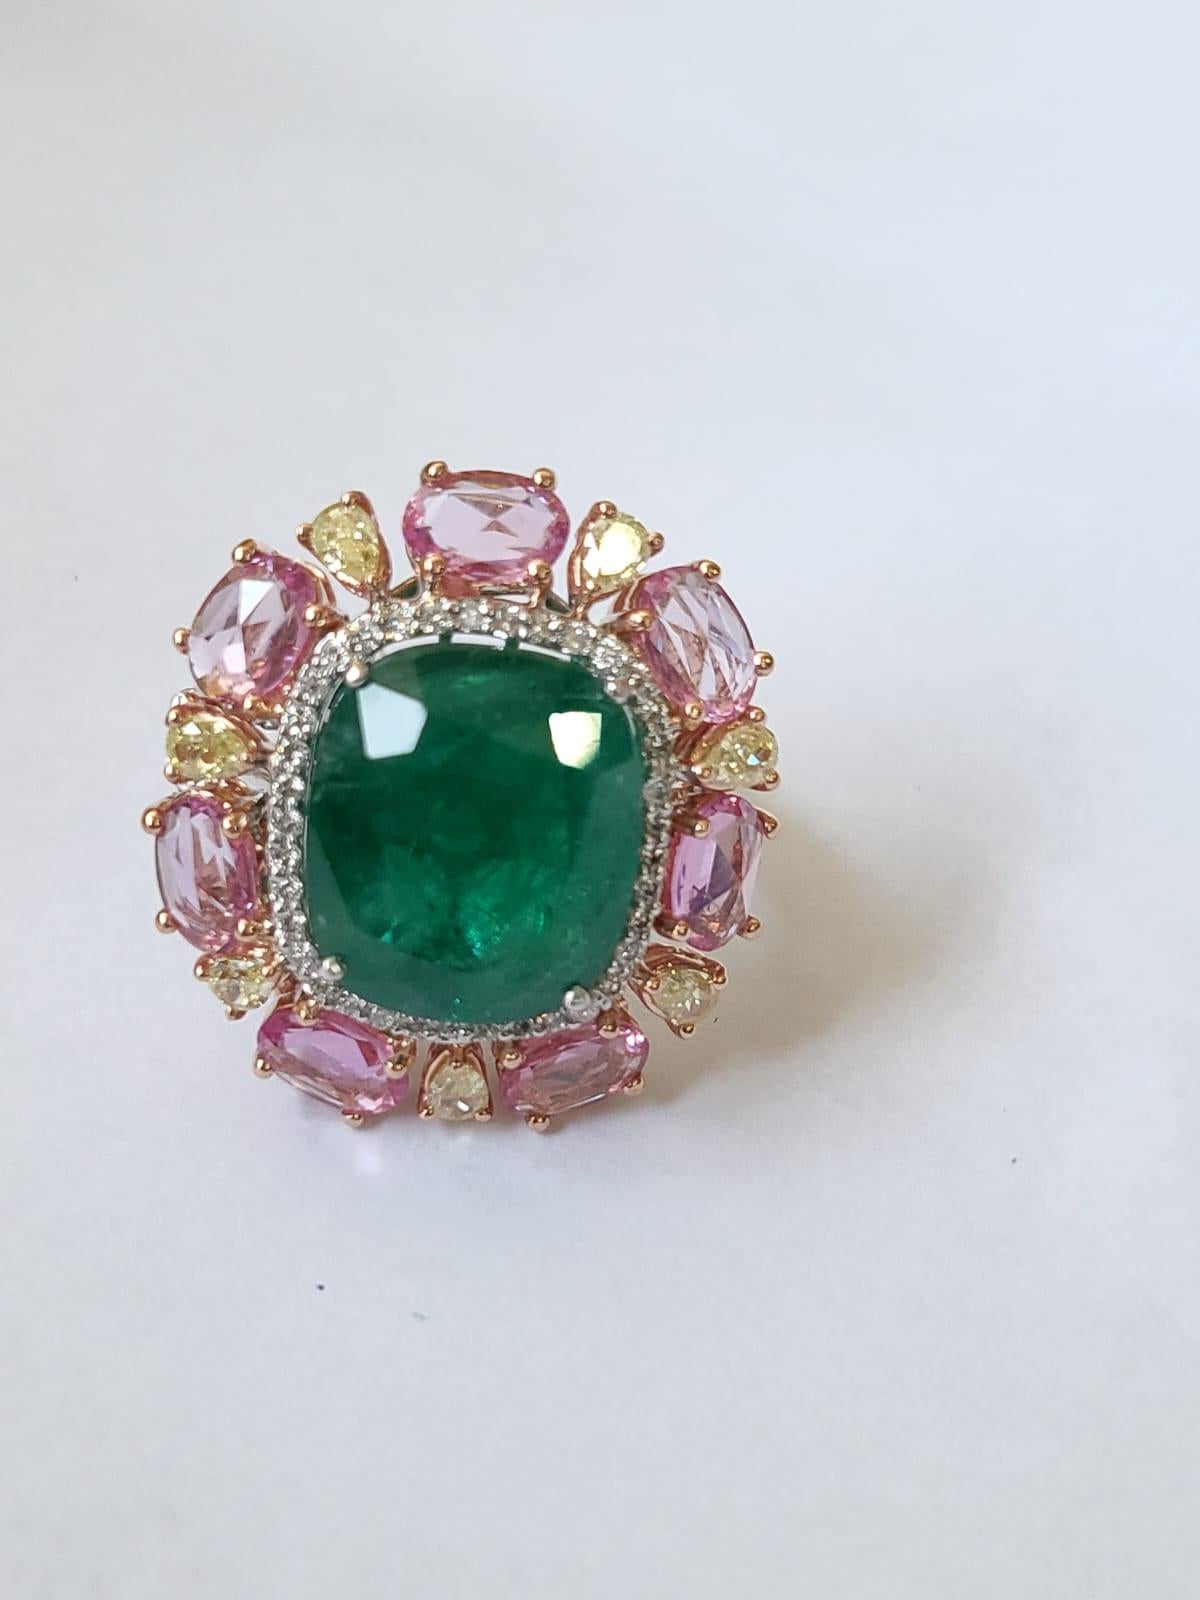 A very gorgeous Emerald & Pink Sapphire Cocktail Ring set in 18K White Gold & Diamonds. The weight of the Emerald is 9.36 carats. The Emerald is completely natural, without any treatment and is of Zambian origin. The weight of the Pink Sapphires is